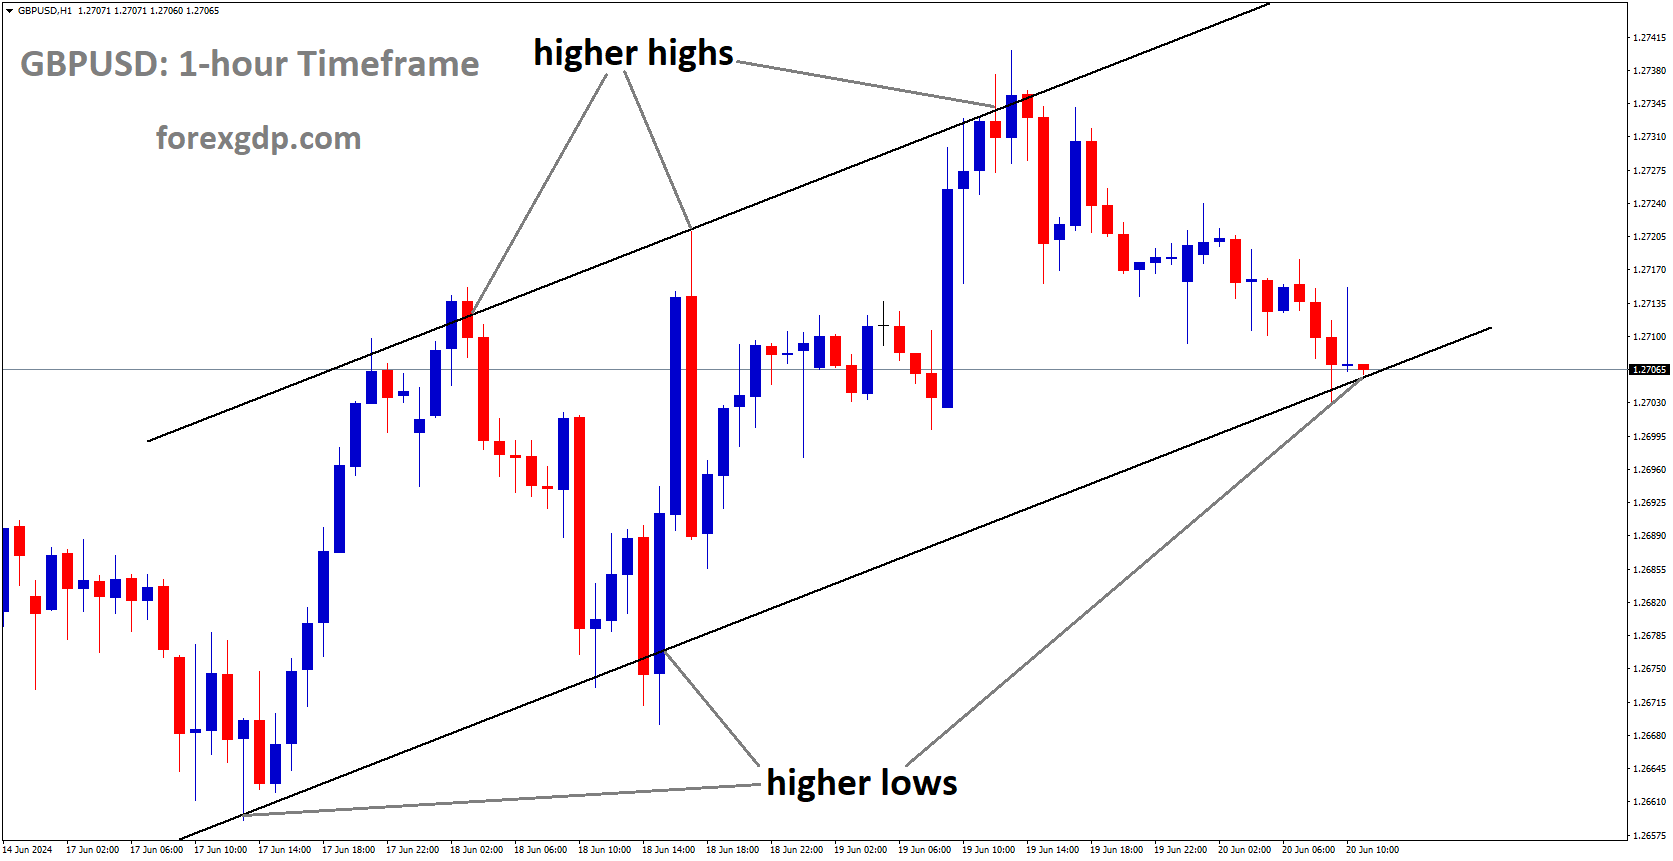 GBPUSD is moving in Ascending channel and market has reached higher low area of the channel